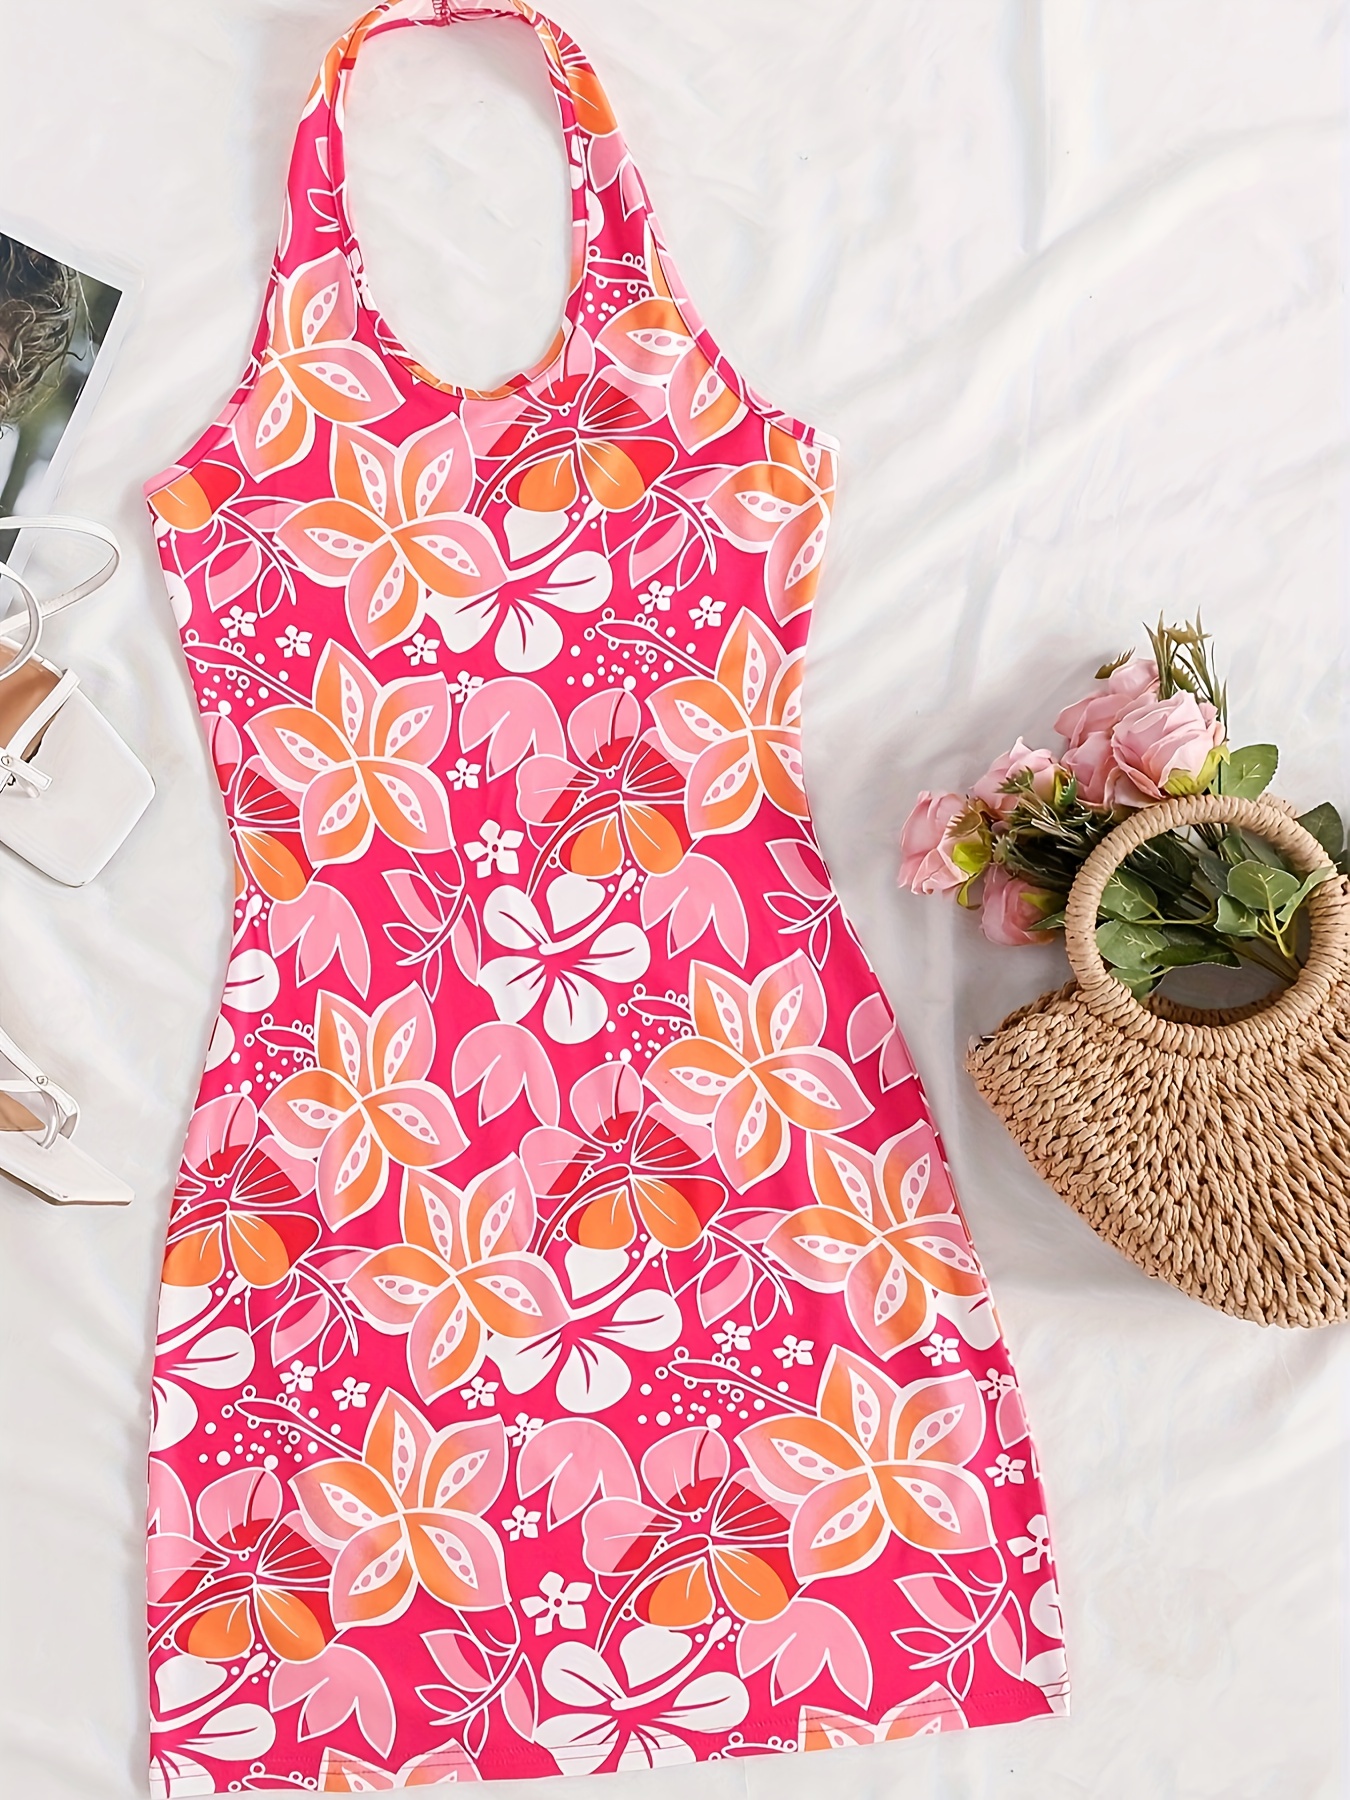 Floral Print Halter Dress, Vacation Style Slim Dress For Spring & Summer, Women's Clothing